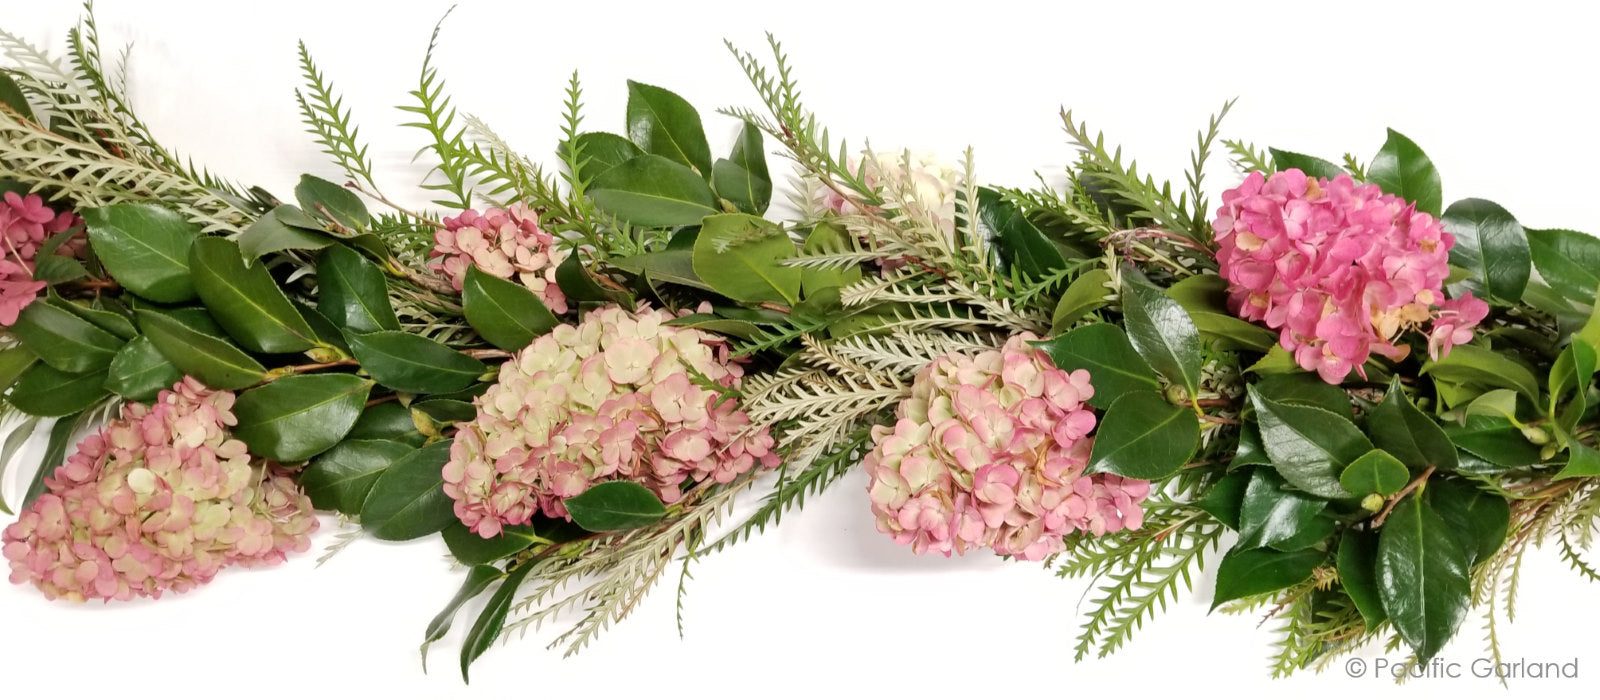 Stunning Hydrangea garland with Camellia and Grevillea